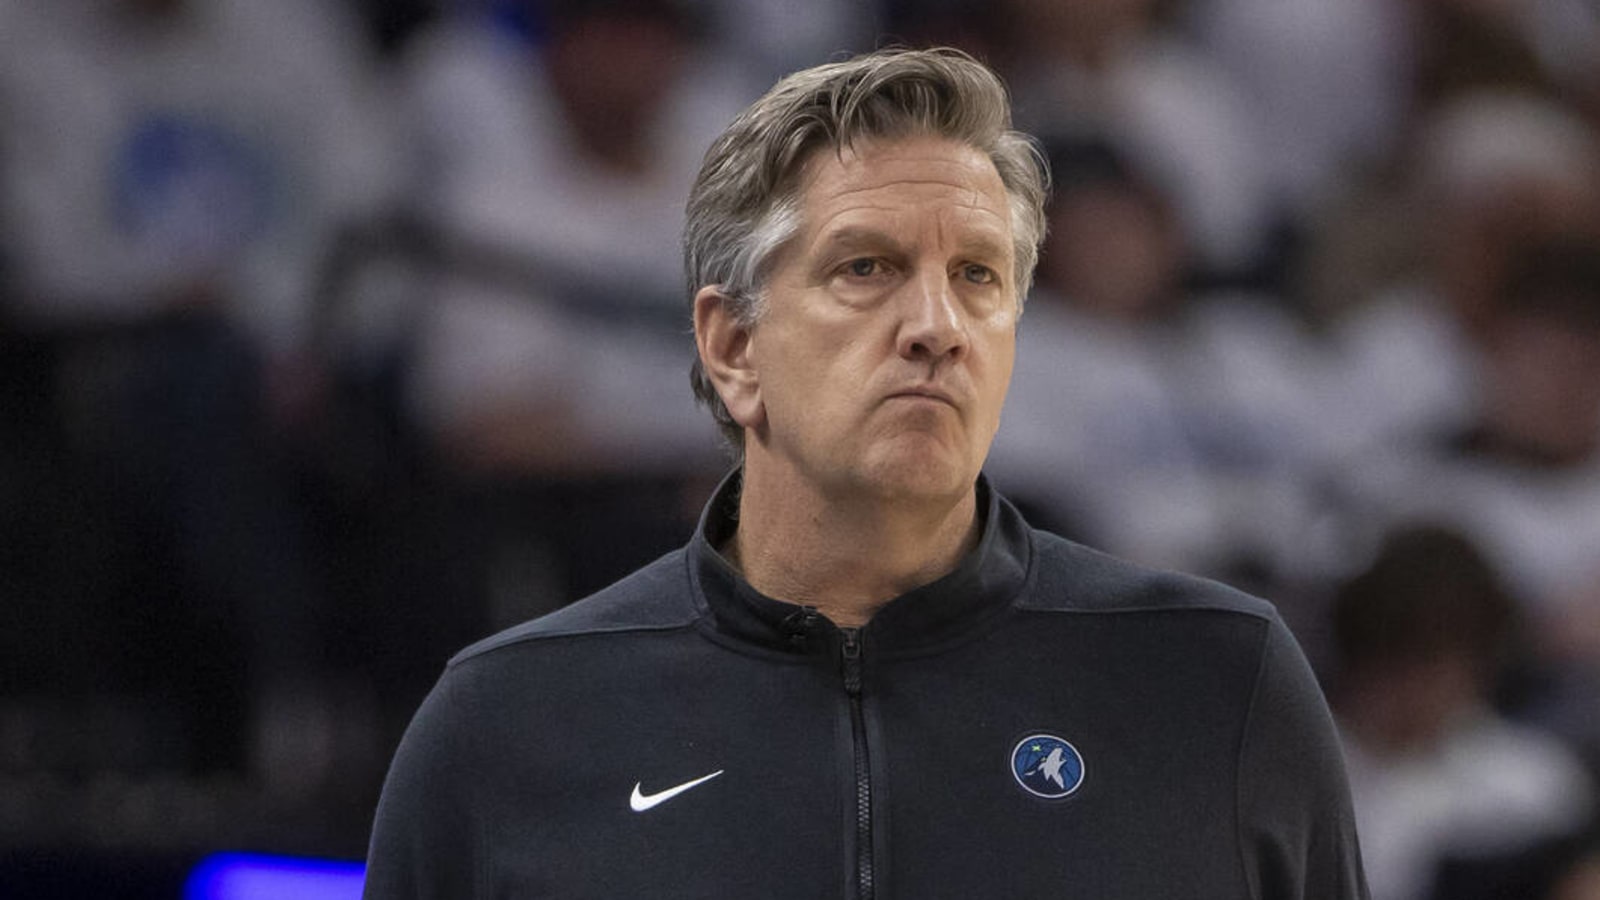 Watch: Timberwolves HC suffers injury in sideline collision